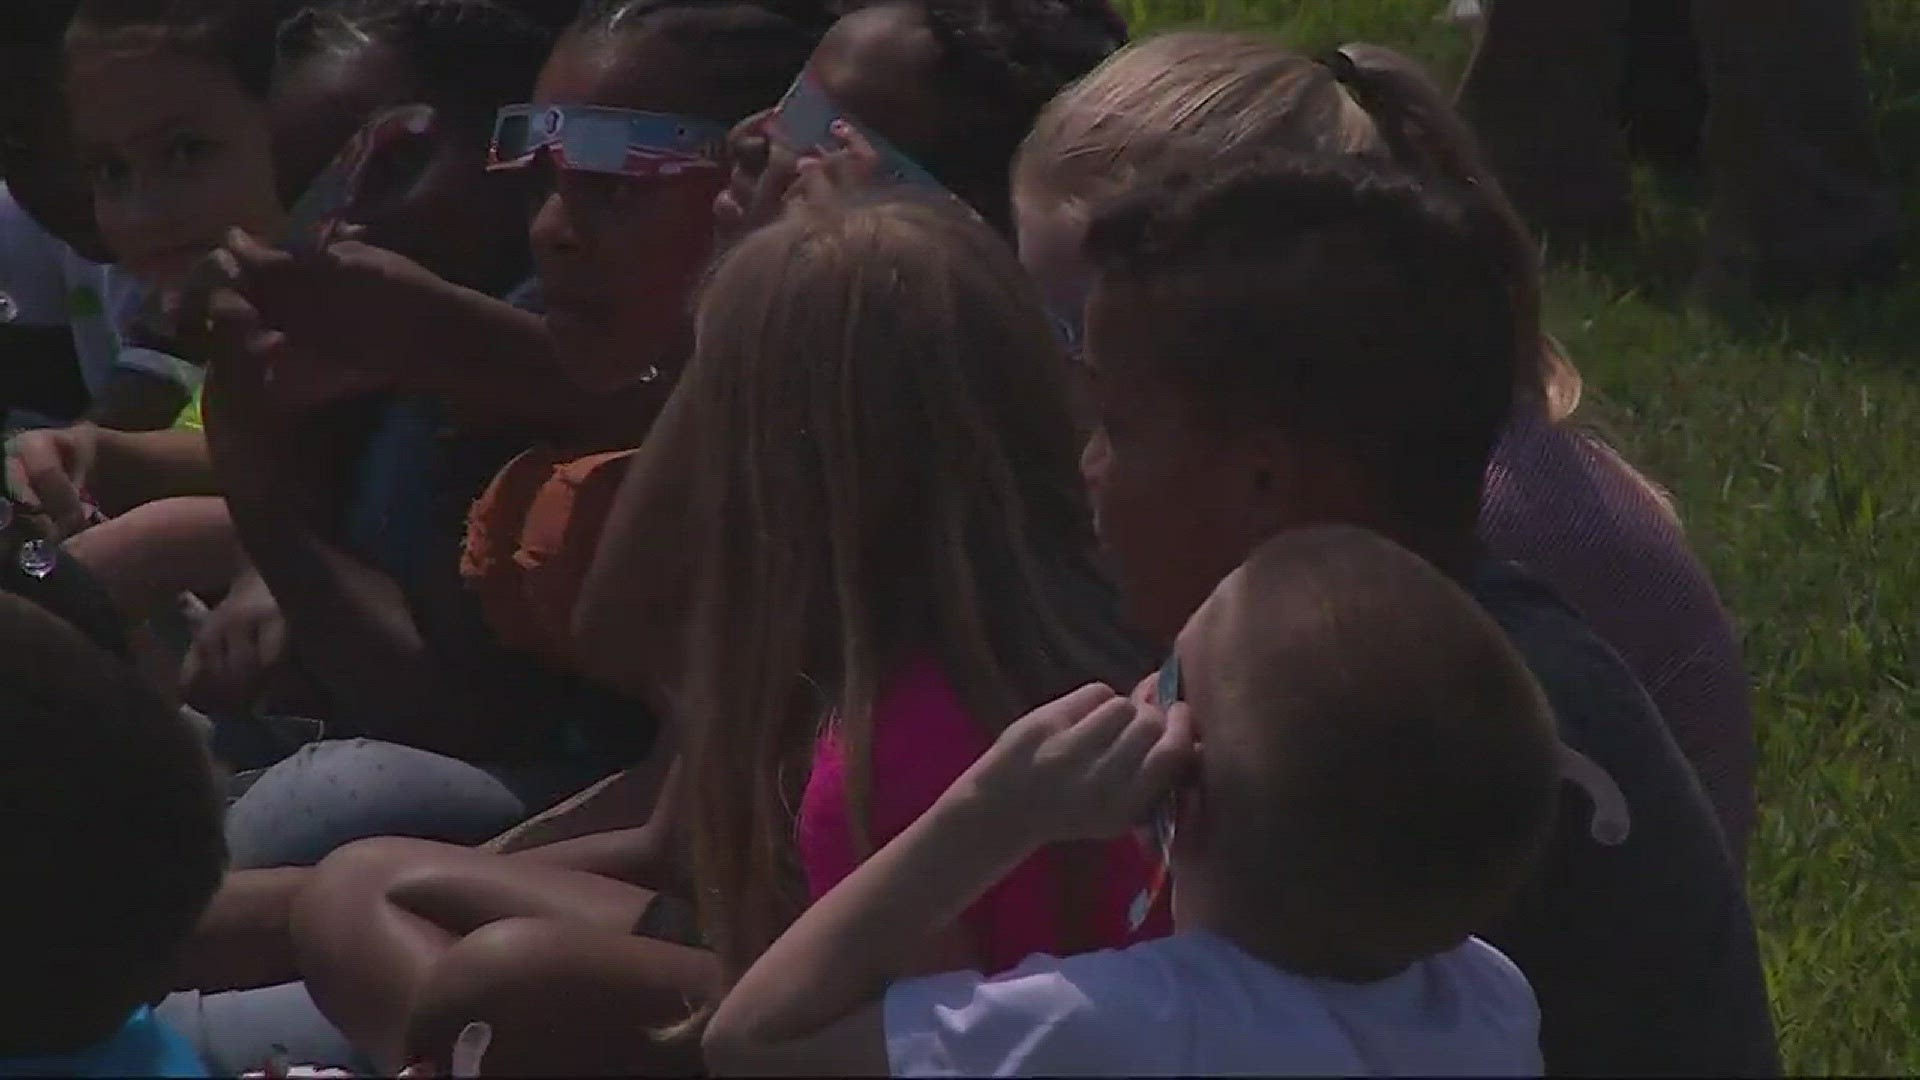 Elementary students spent the day learning and watching the eclipse in South Carolina.